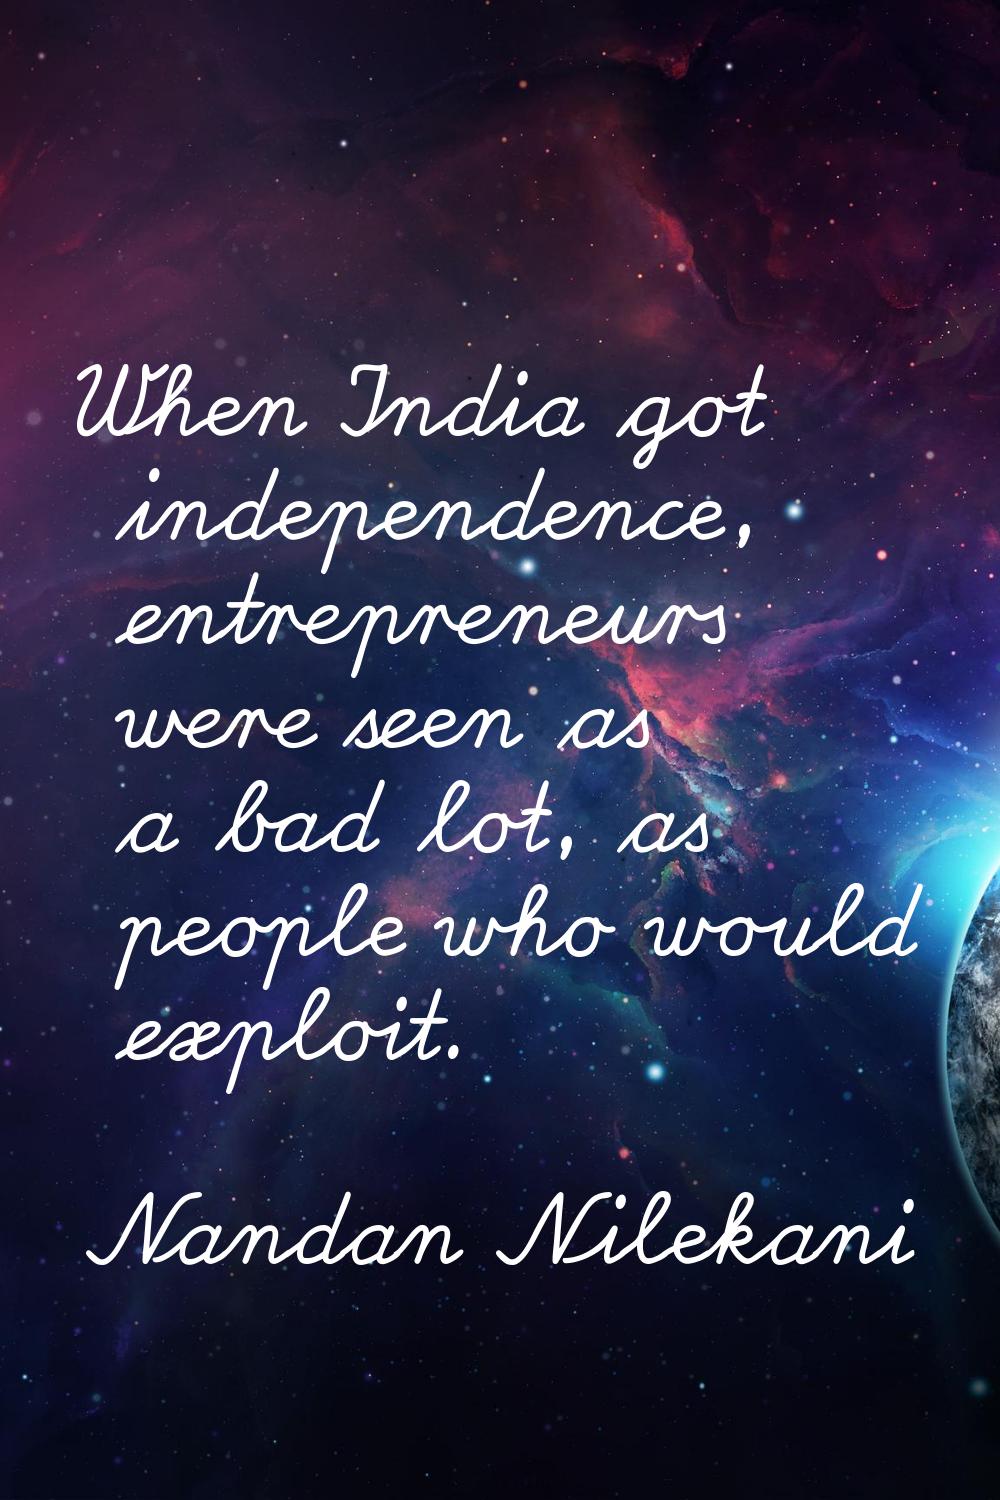 When India got independence, entrepreneurs were seen as a bad lot, as people who would exploit.